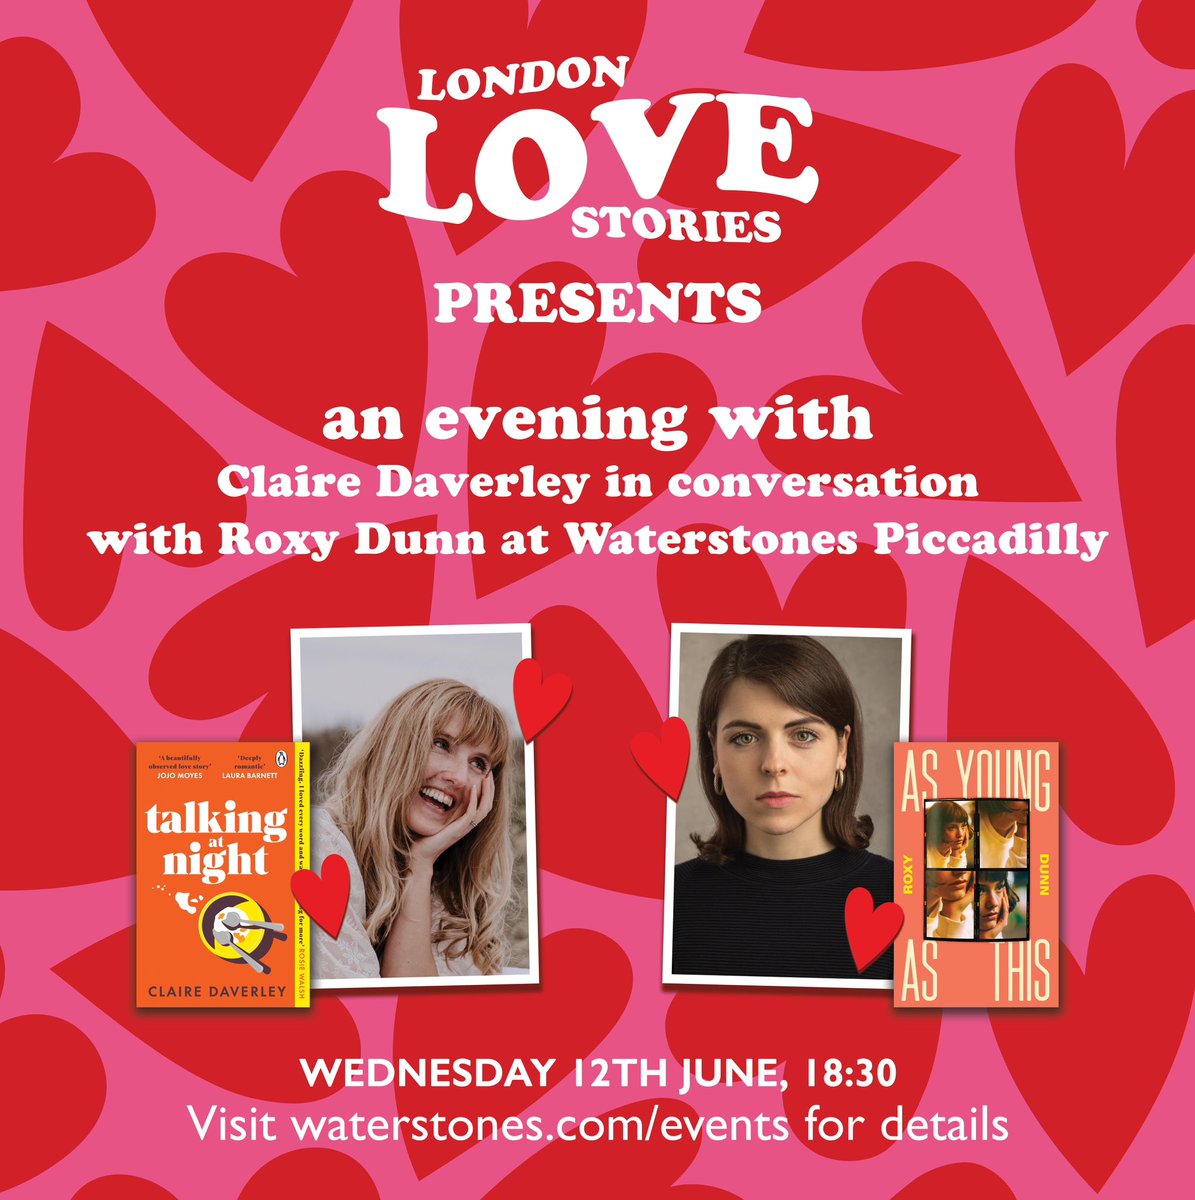 Im hugely looking forward to hosting this event @WaterstonesPicc where I’ll be talking to @ClaireDaverley about her gorgeous, tender, warm, honest, bitter-sweet (I could go on listing adjectives but they still wouldn’t capture the beauty of this book) debut novel #TalkingatNight